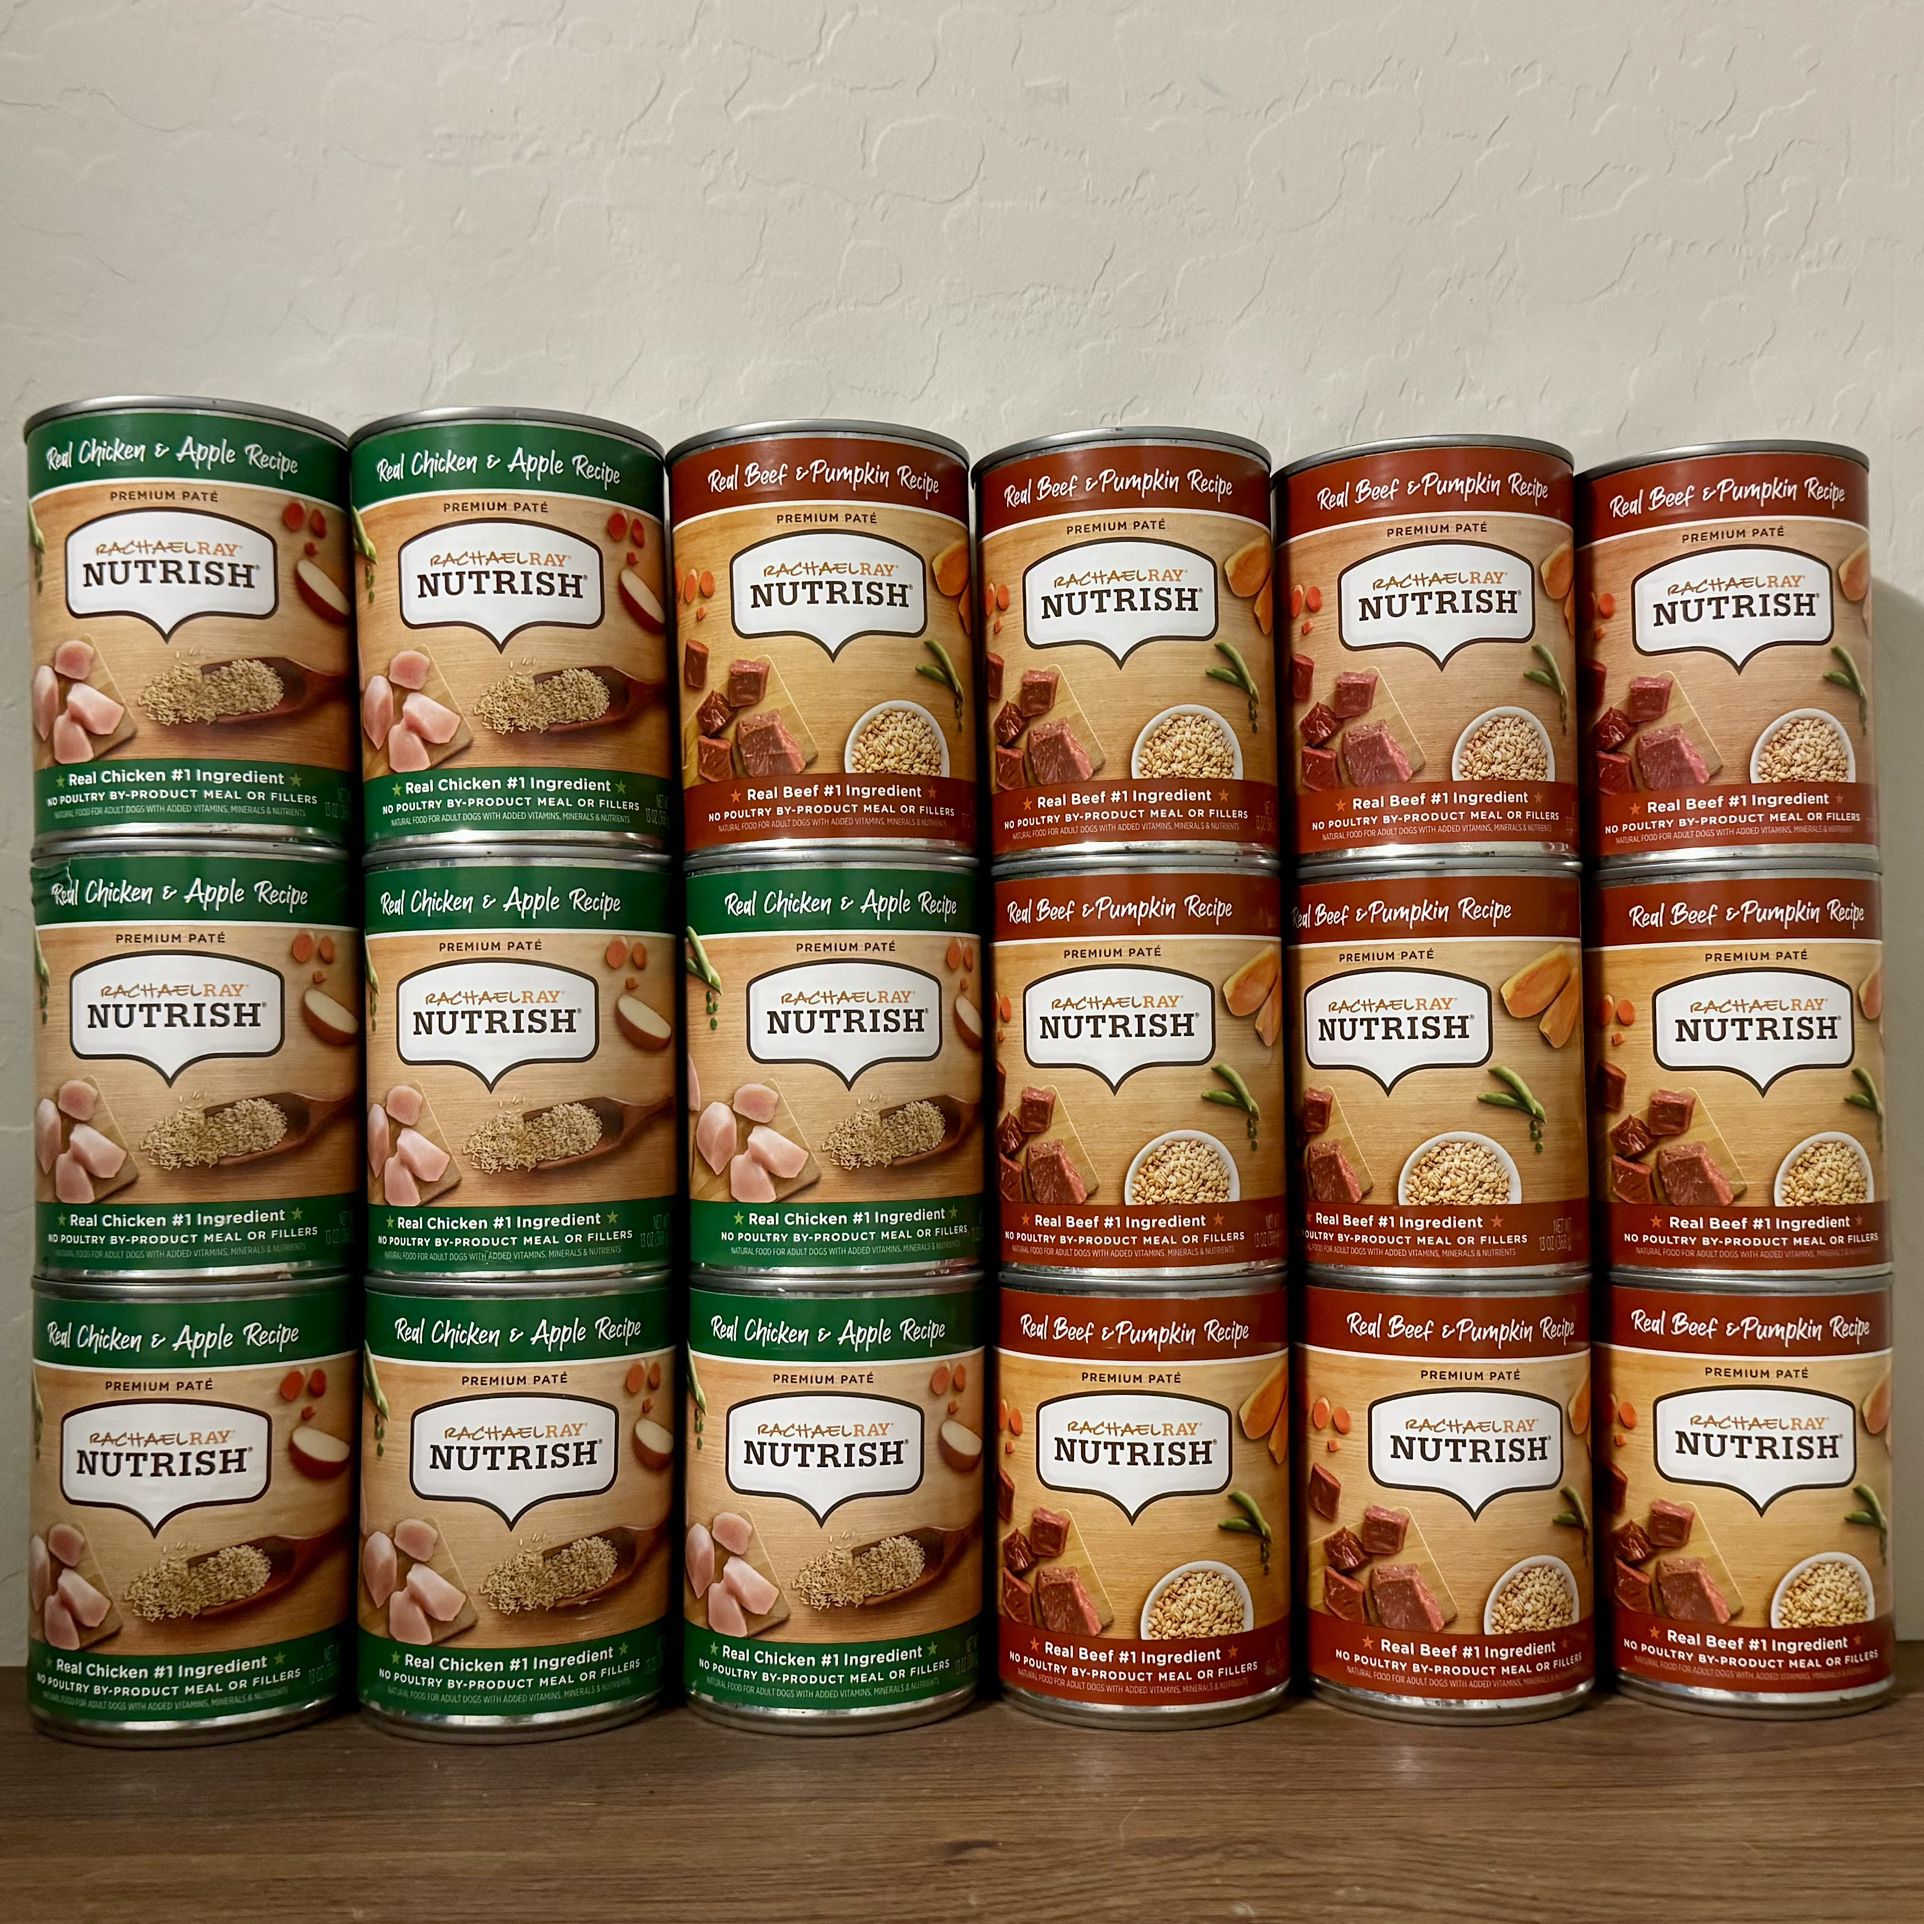 Rachael Ray Nutrish Dog Food Bundle - Total 18 Cans Of 13oz